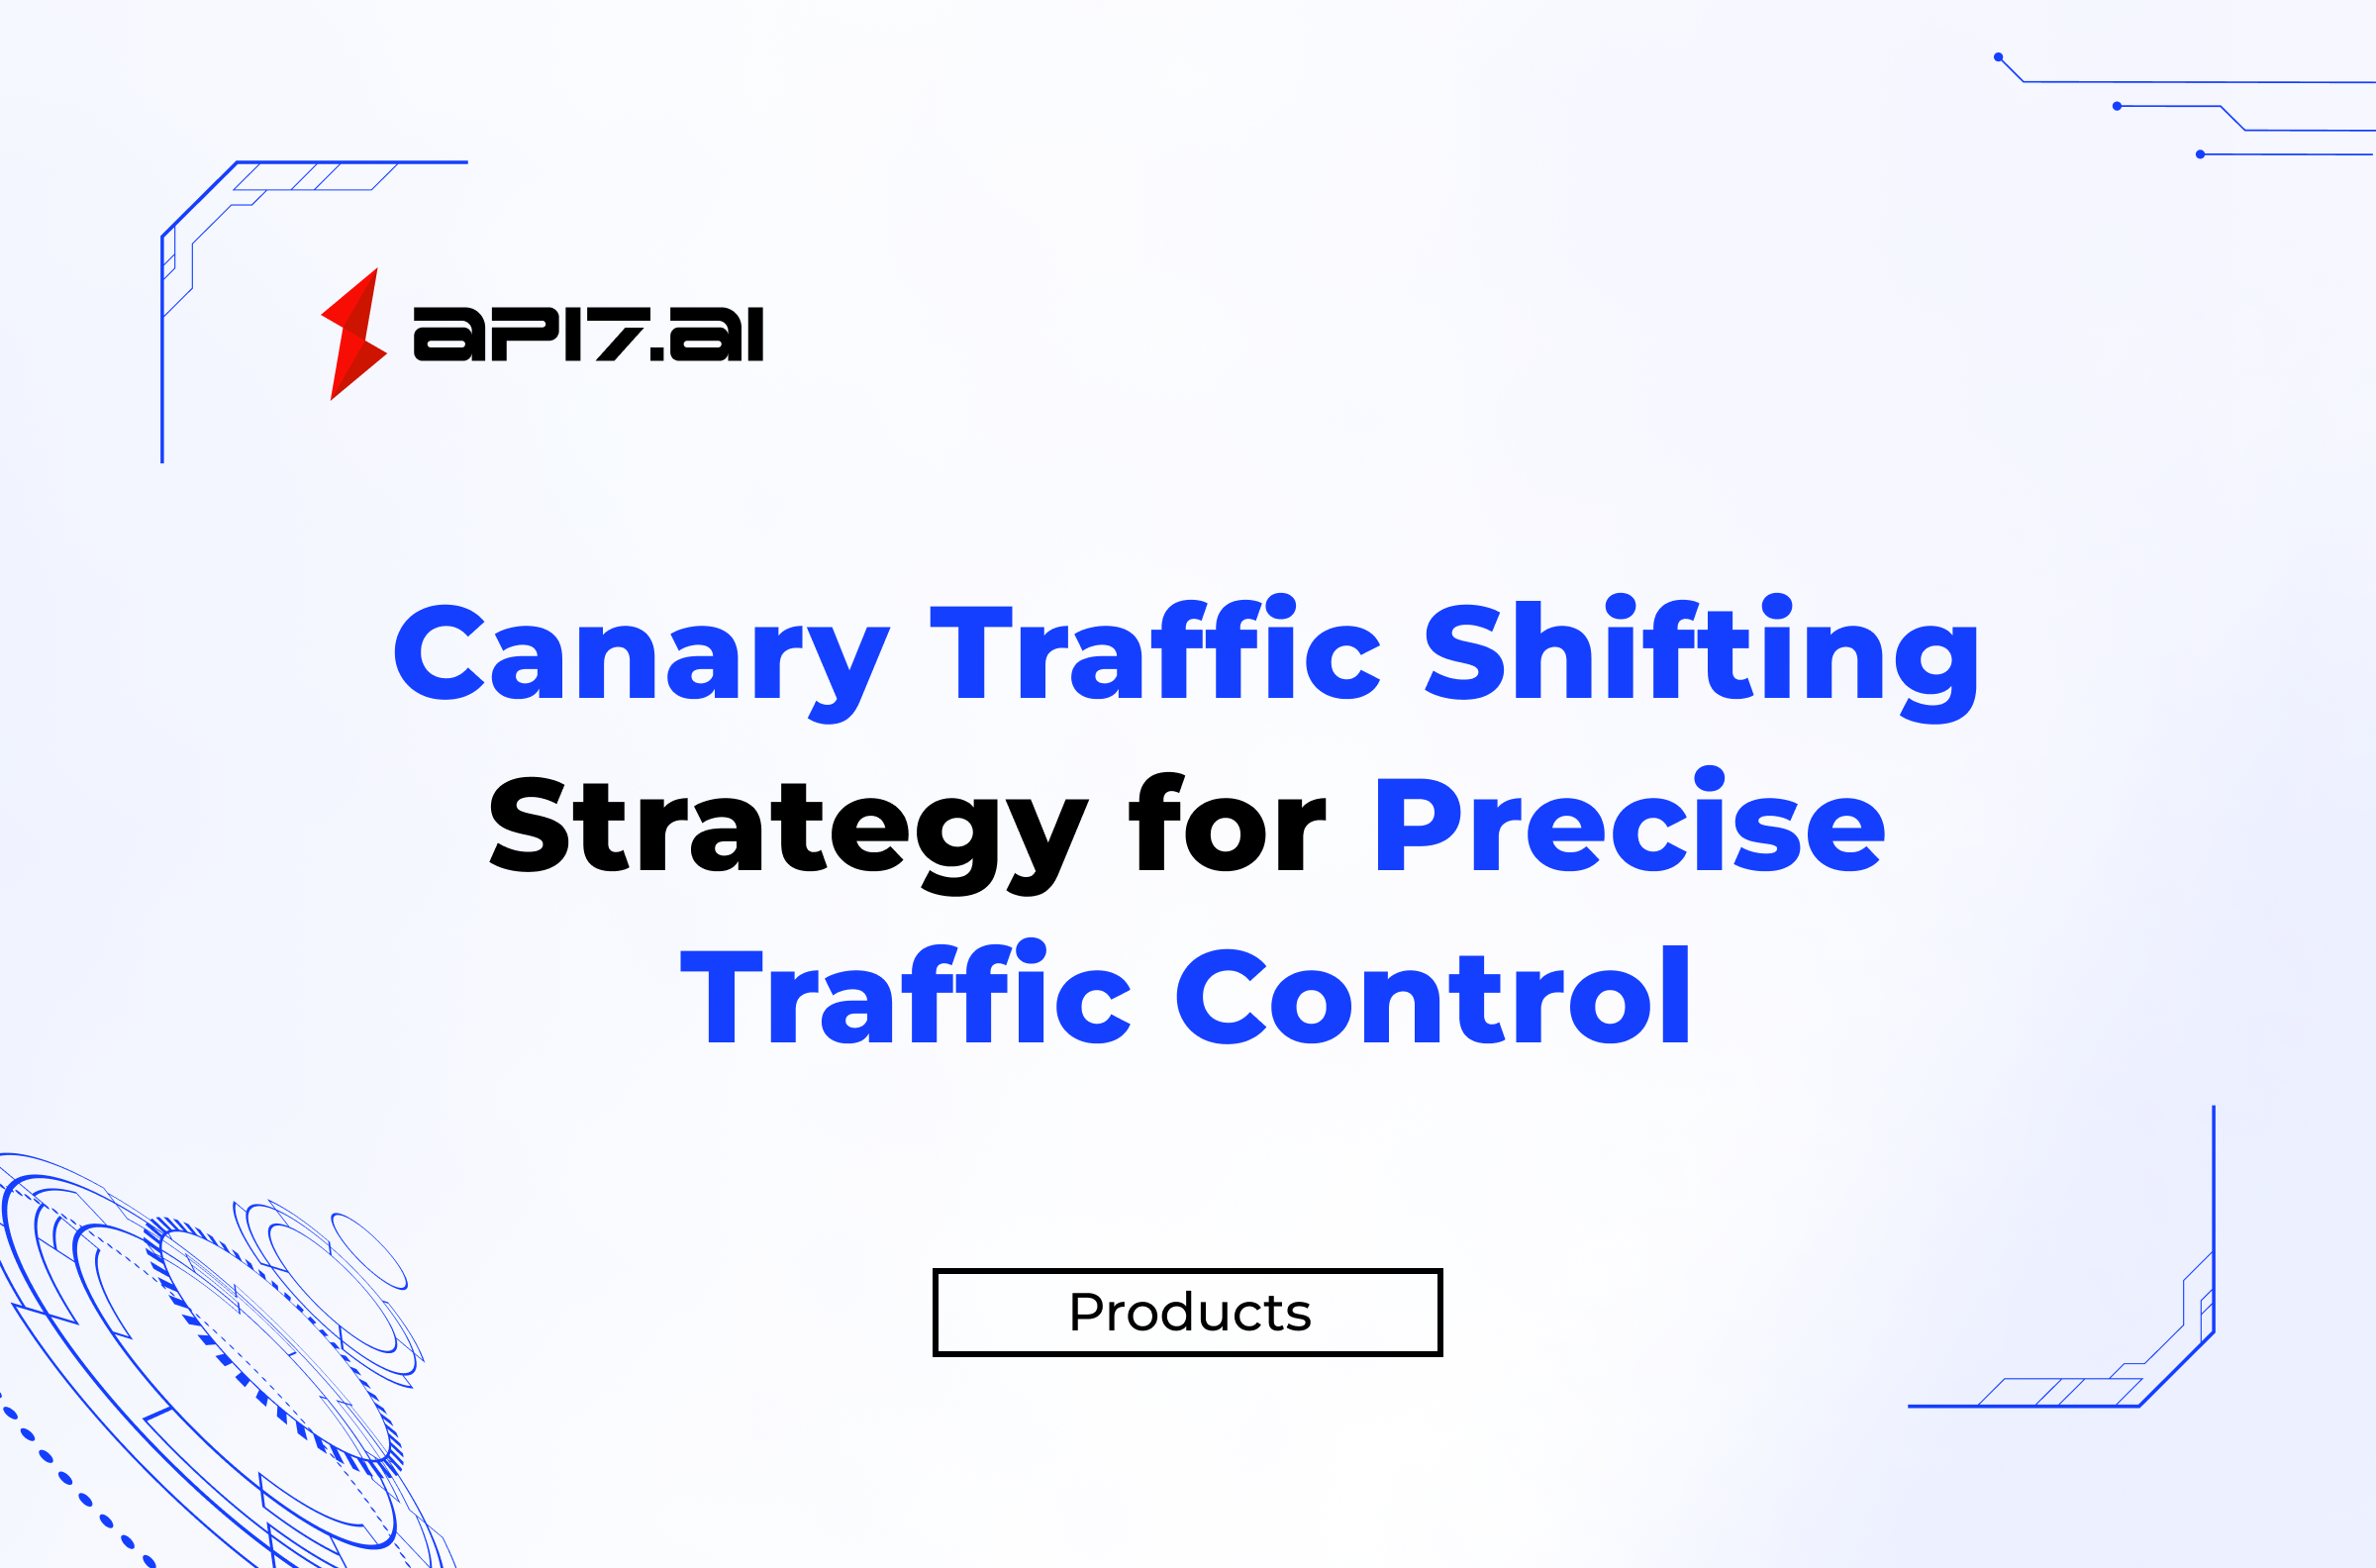 API7 Enterprise's Canary Traffic Shifting Strategy for Precise Traffic Control